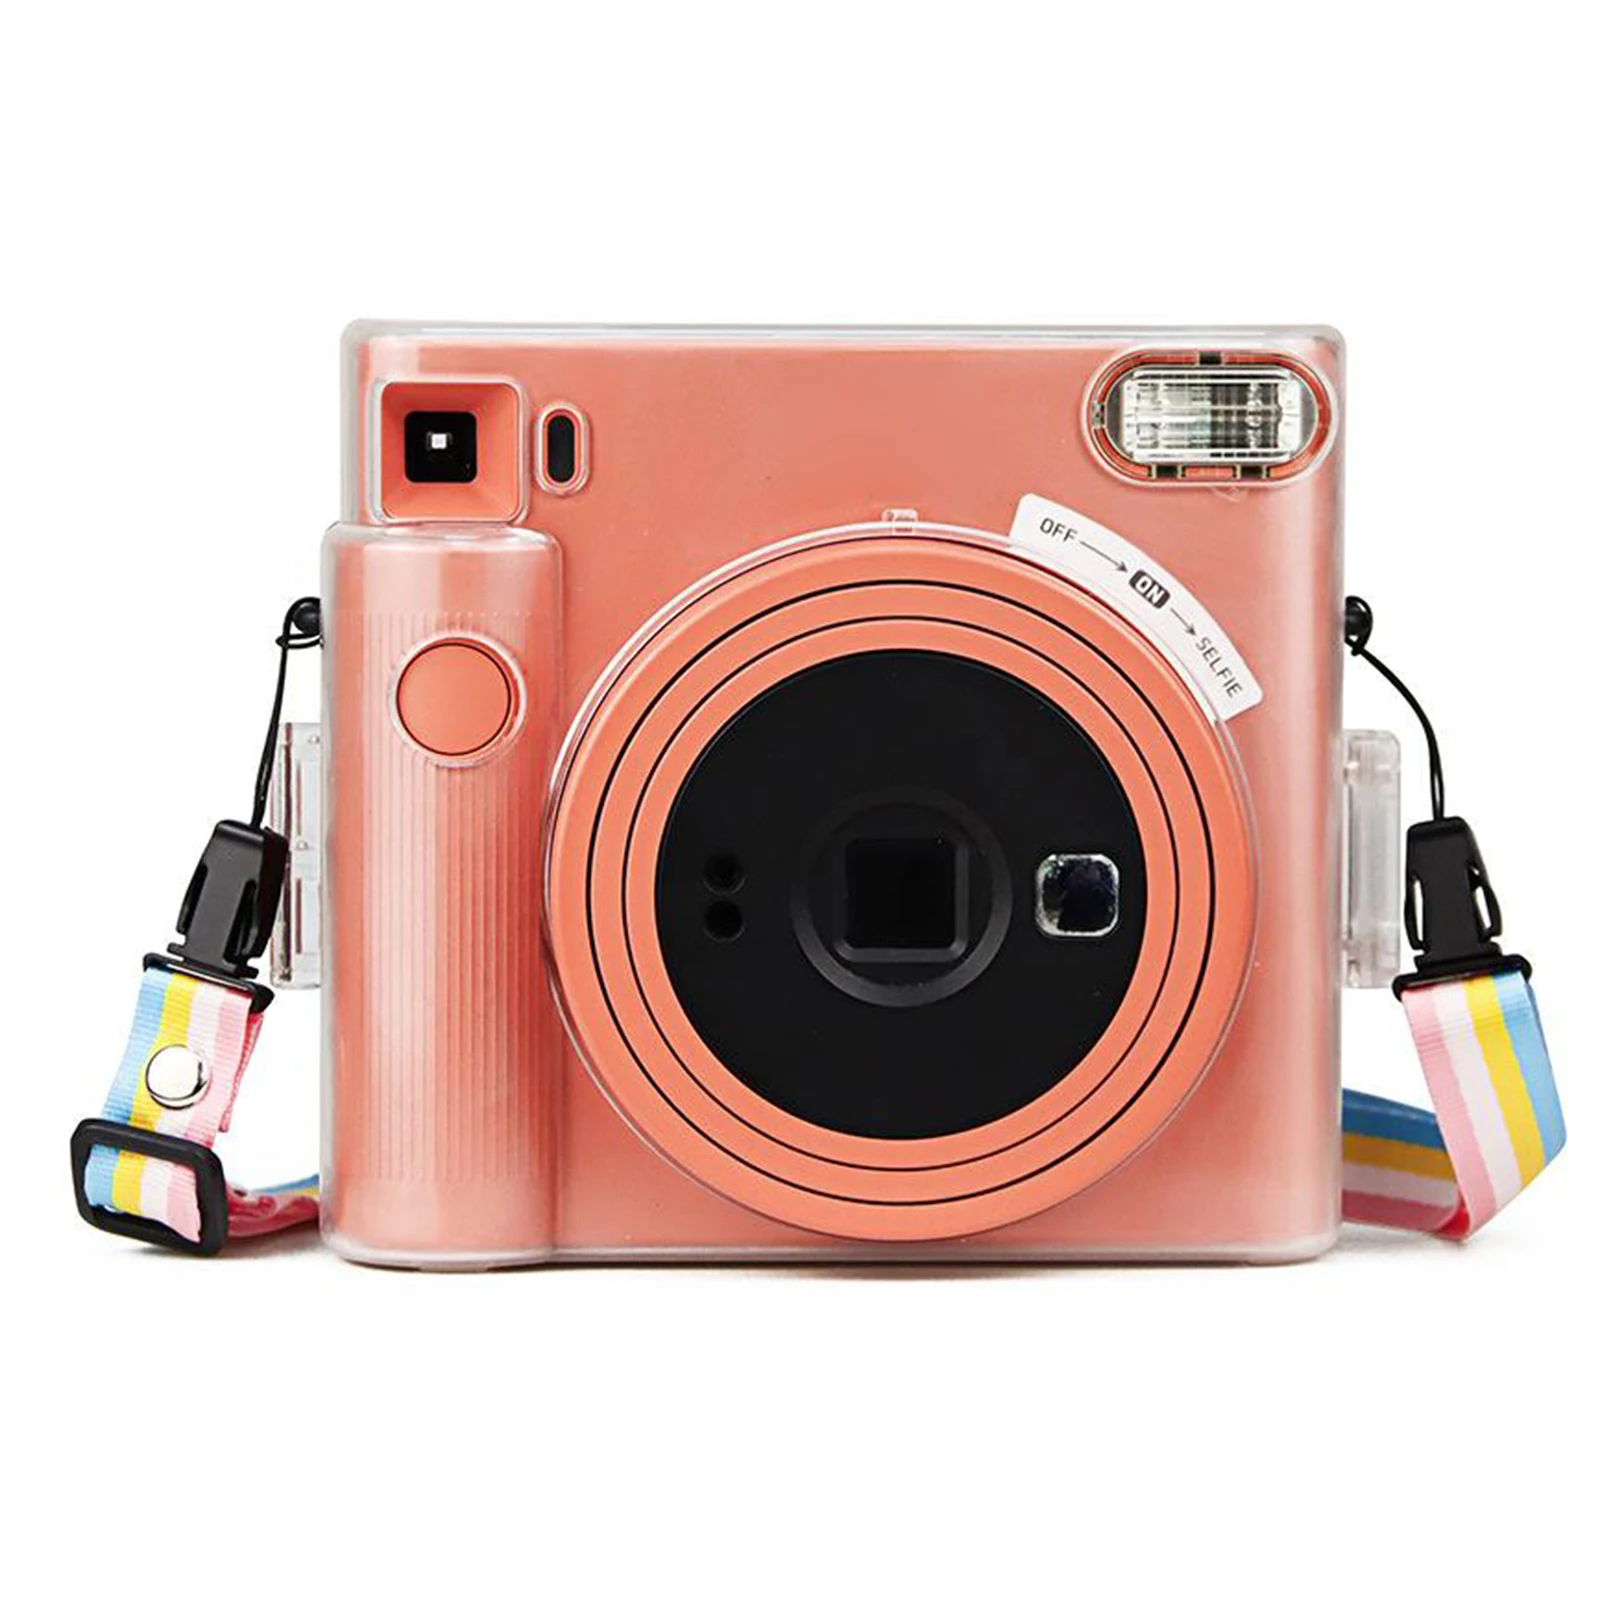 PVC Protective Case Cover Pouch with Removable Shoulder Strap Transparent for Fujifilm Instax Square SQ1 Camera